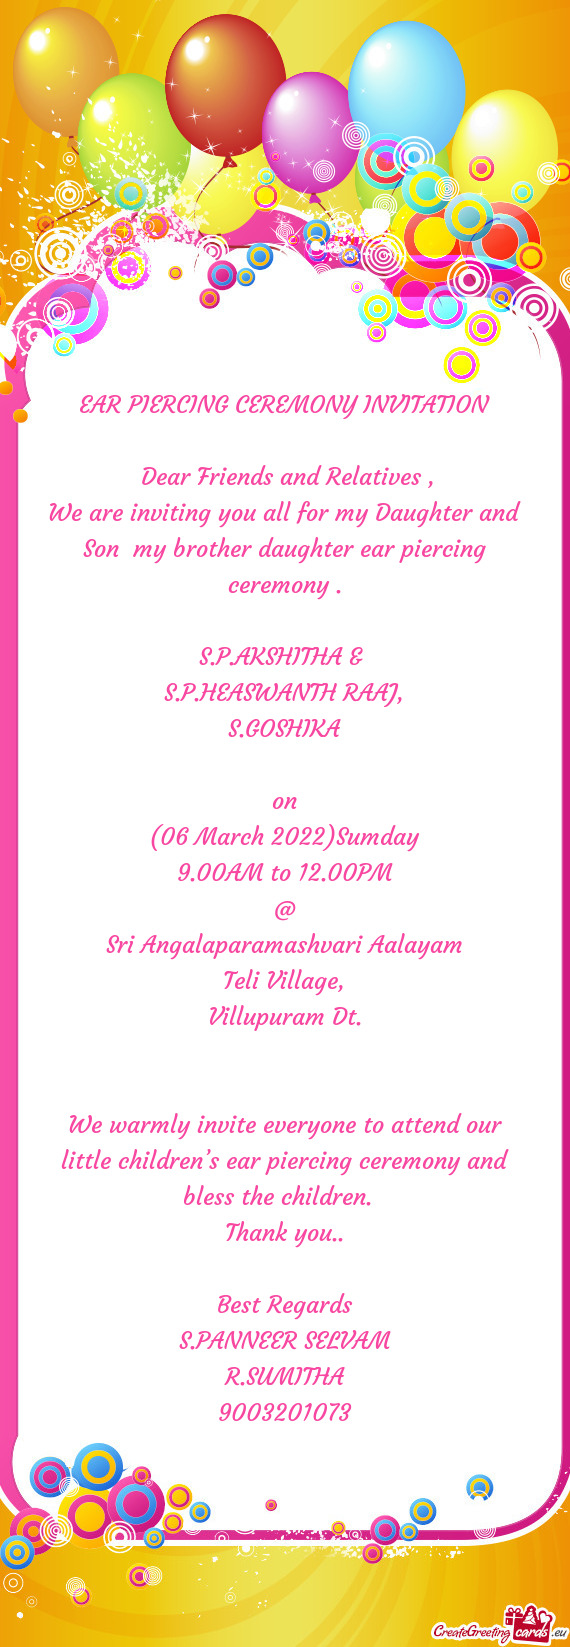 We are inviting you all for my Daughter and Son my brother daughter ear piercing ceremony